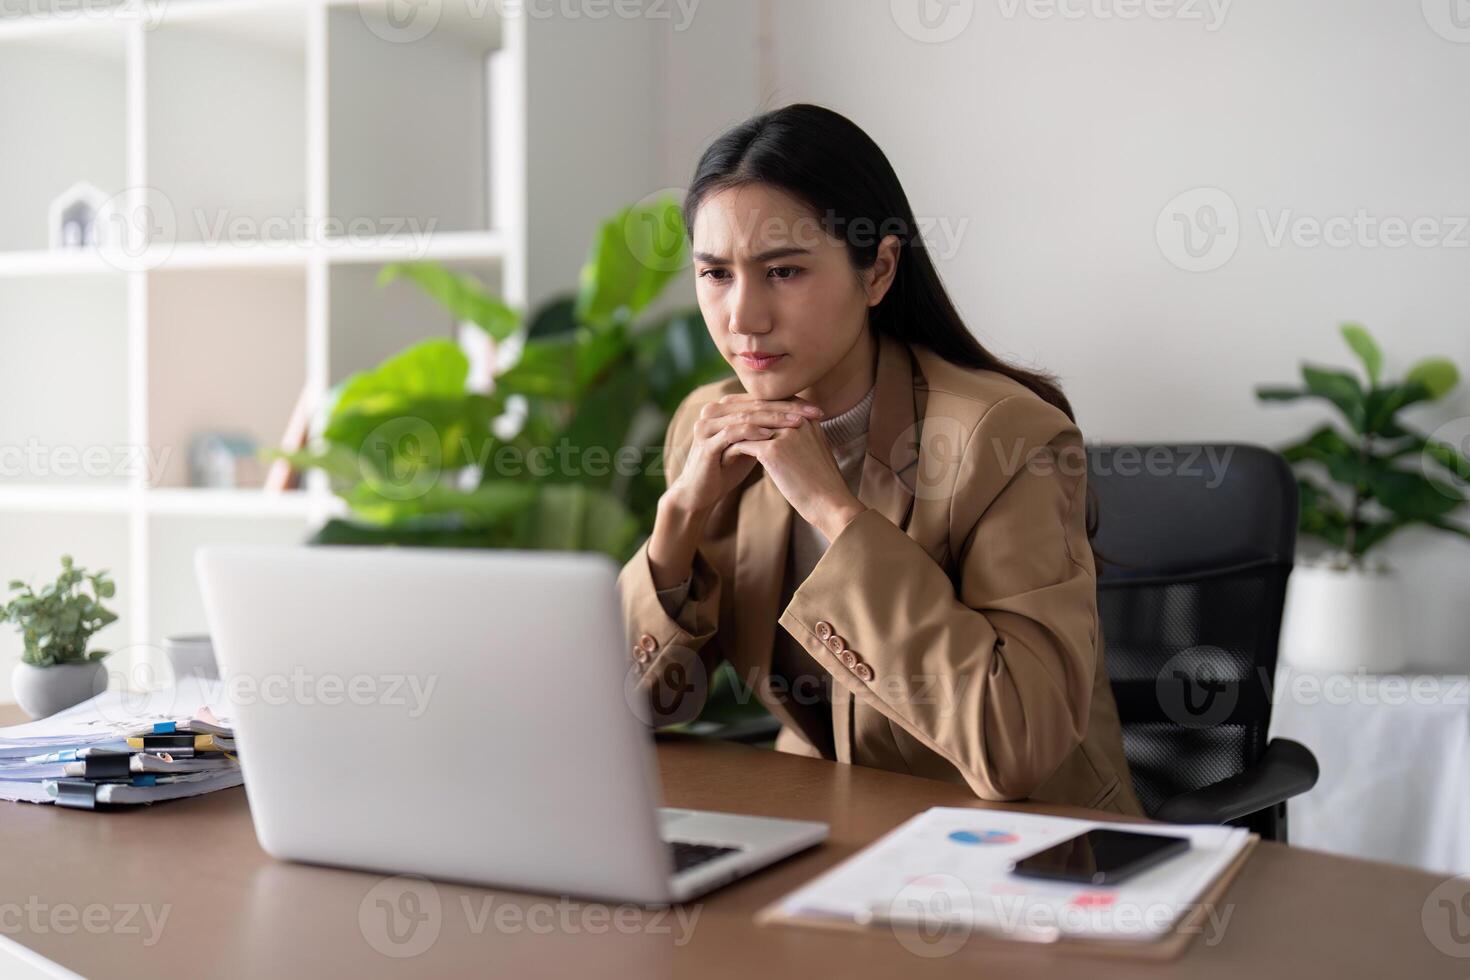 Eco friendly, businesswoman young asian stress in working on laptop while sitting at home office, green room area. sustainable lifestyle concept photo